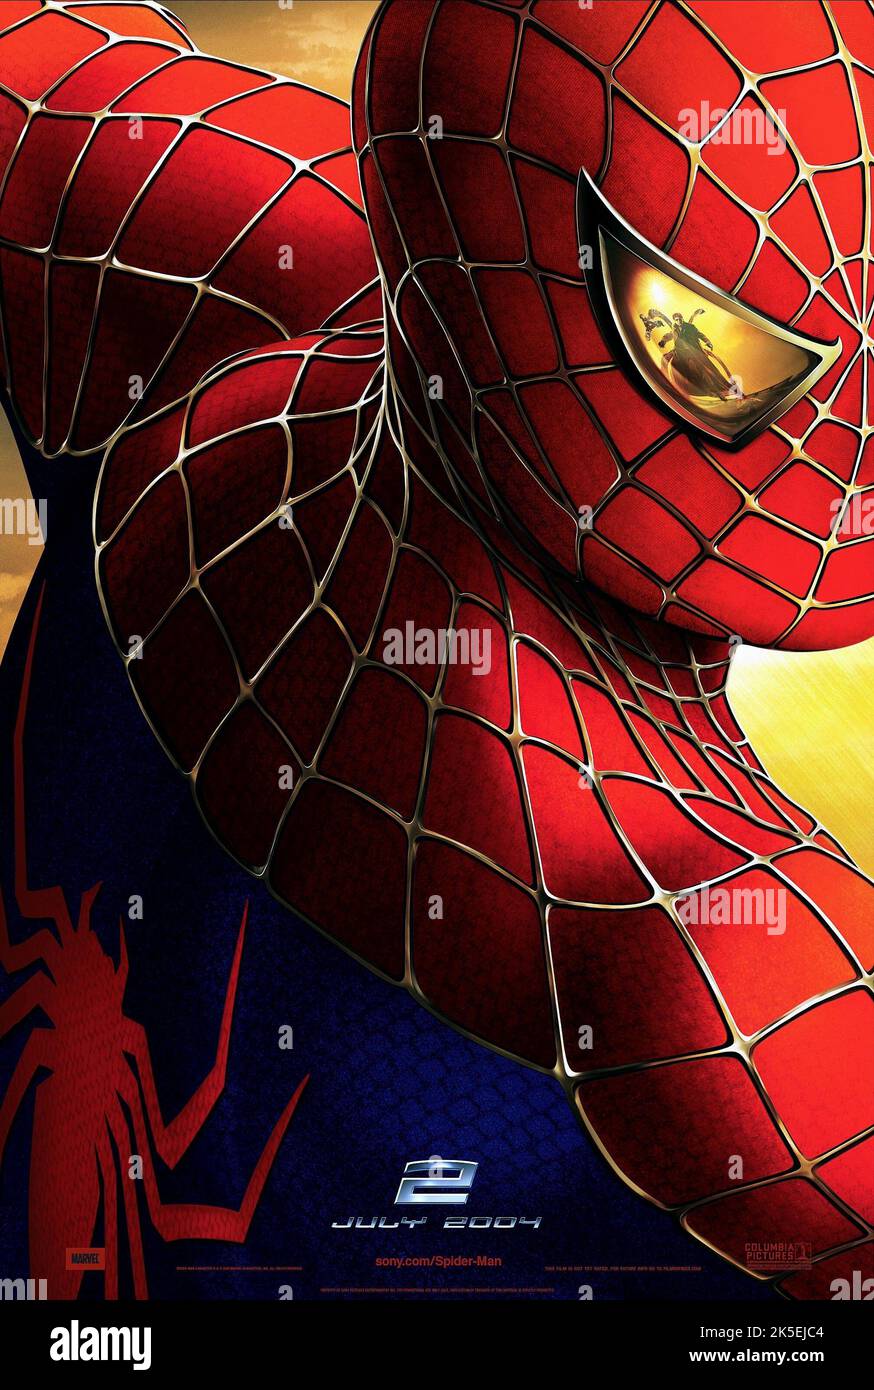 TOBEY MAGUIRE, ALFRED MOLINA POSTER, SPIDER-MAN 2, 2004 Stock Photo